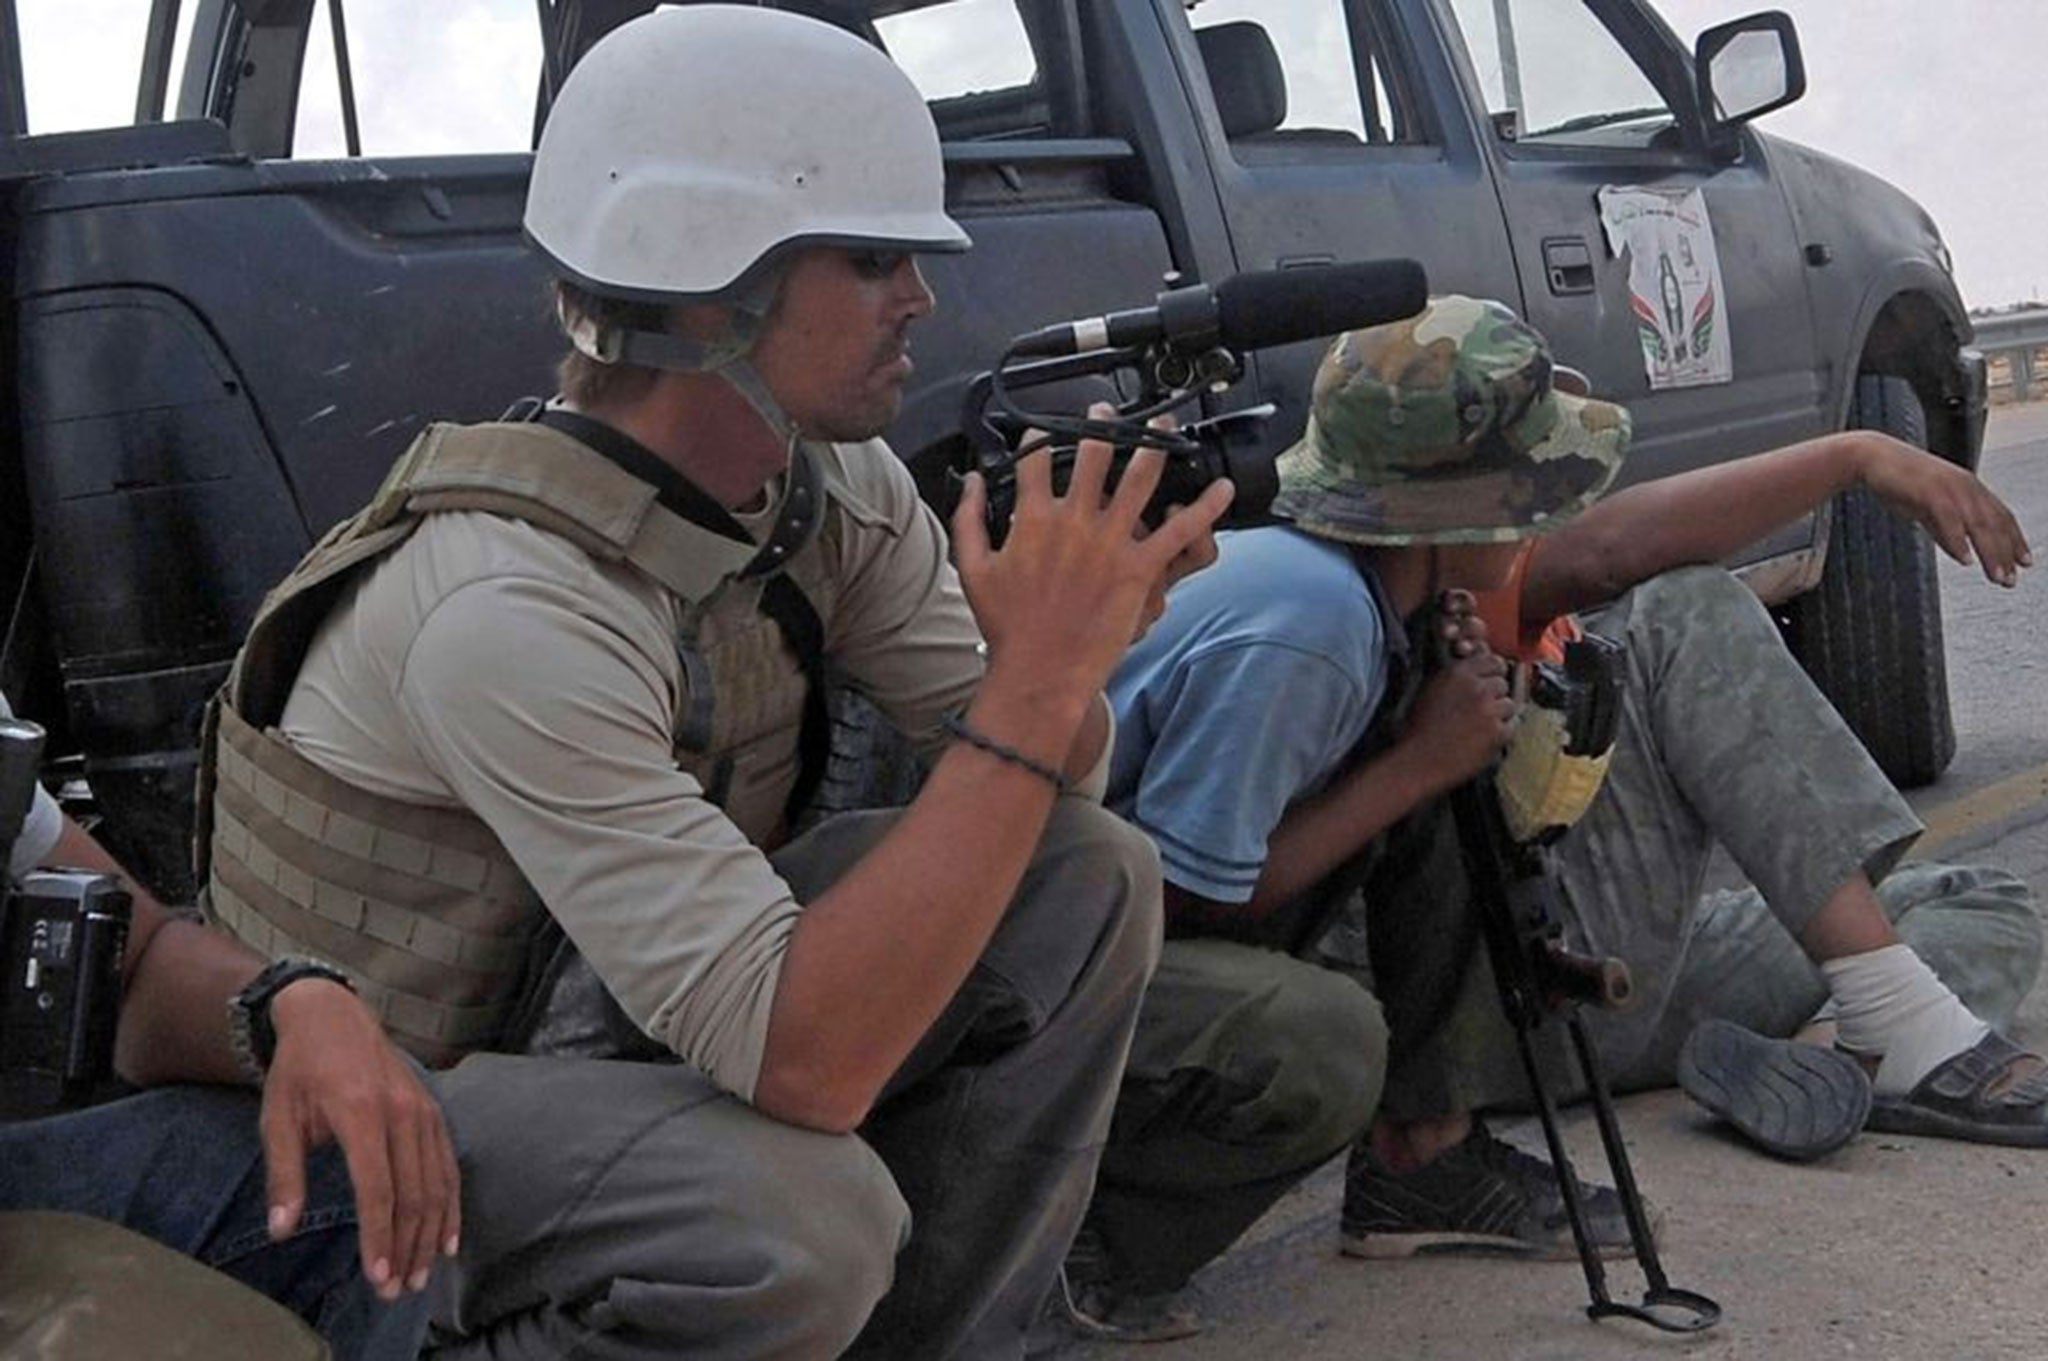 In November 2012, James Foley and another journalist were working in the northern Syrian province of Idlib when they were kidnapped by unidentified gunmen